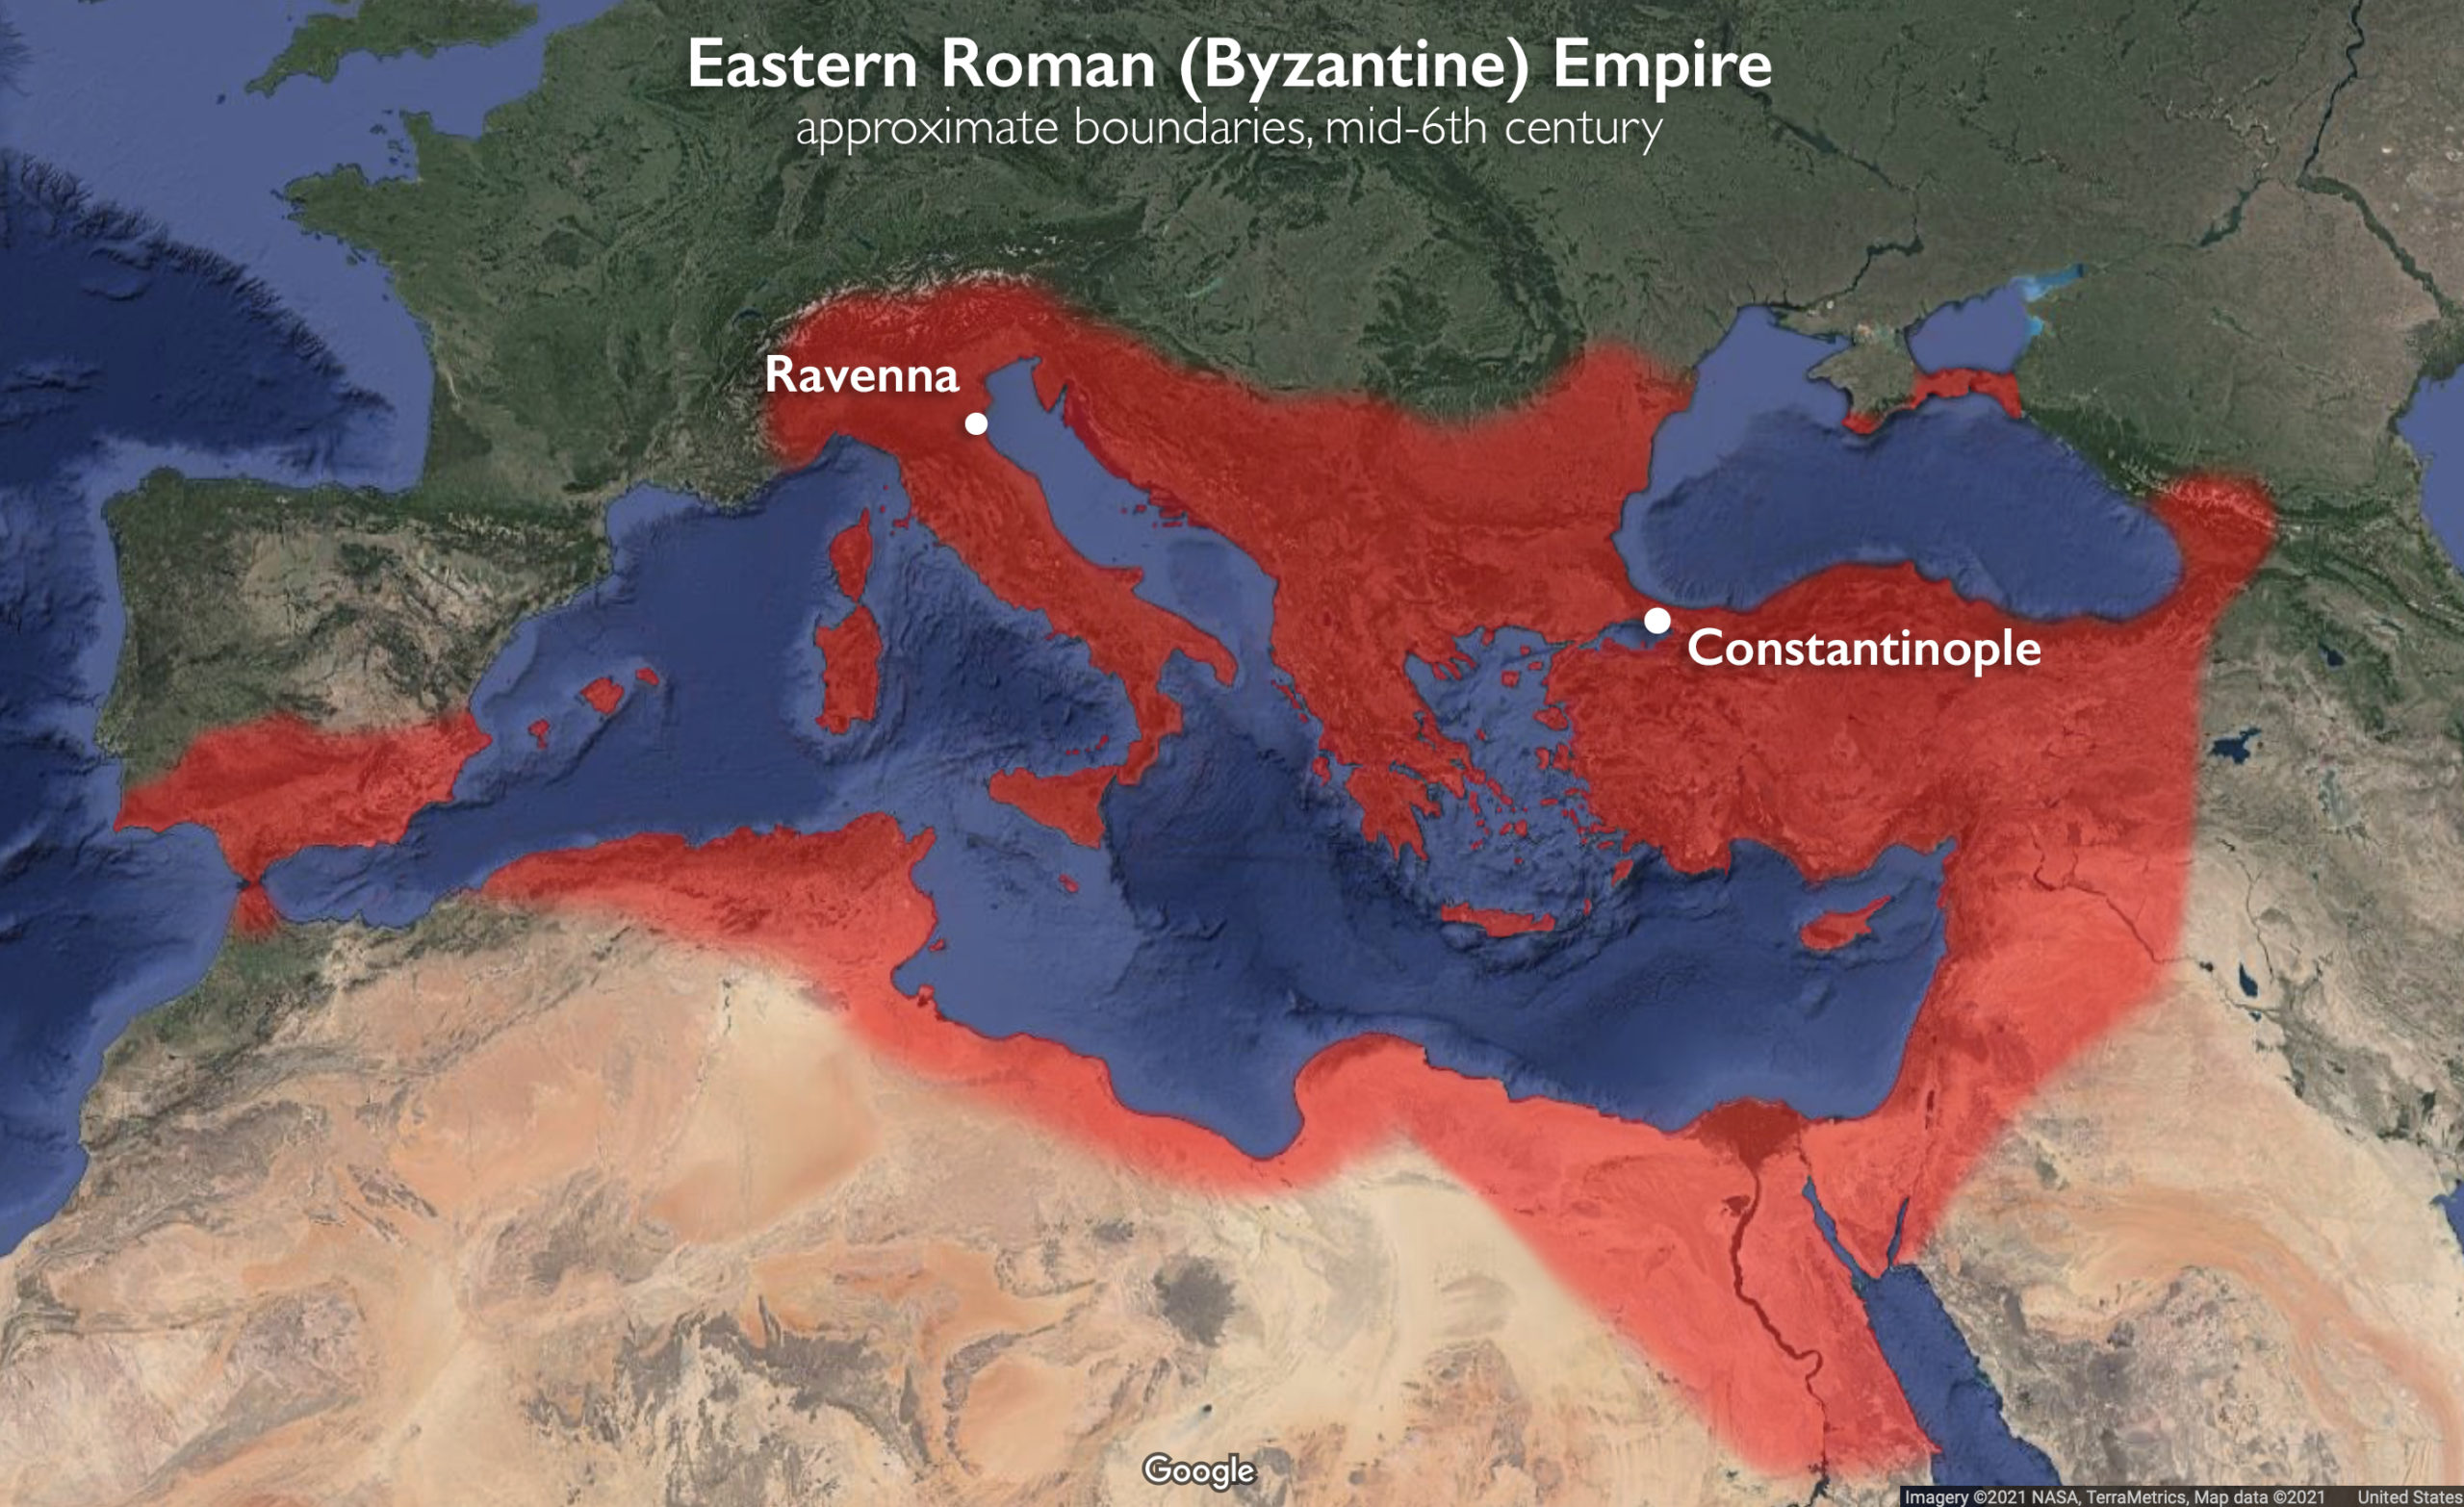 The Eastern Roman (Byzantine) Empire, approximate boundaries, mid-6th century (underlying map © Google)